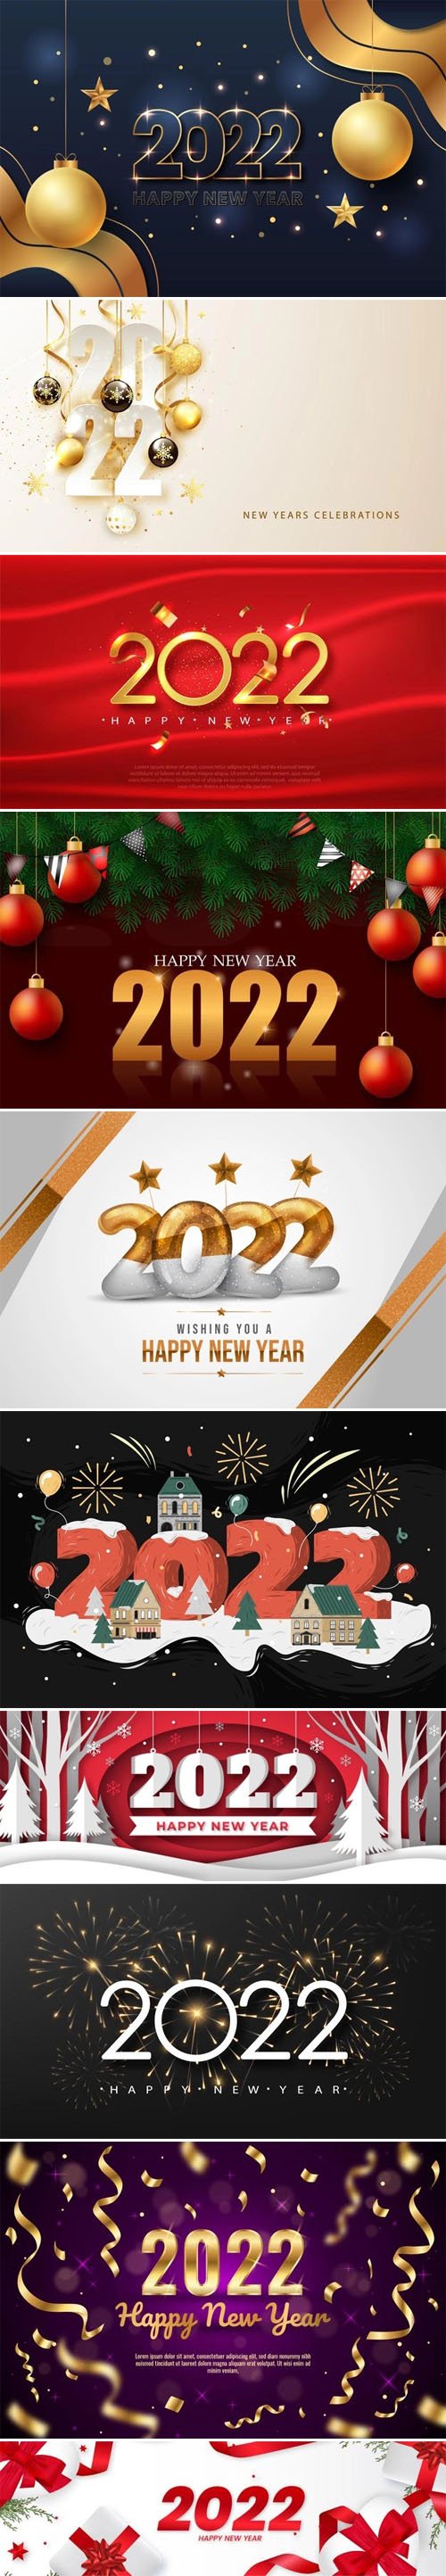 10 Happy New Year 2022 Banners & Backgrounds Vector Templates Vol.2